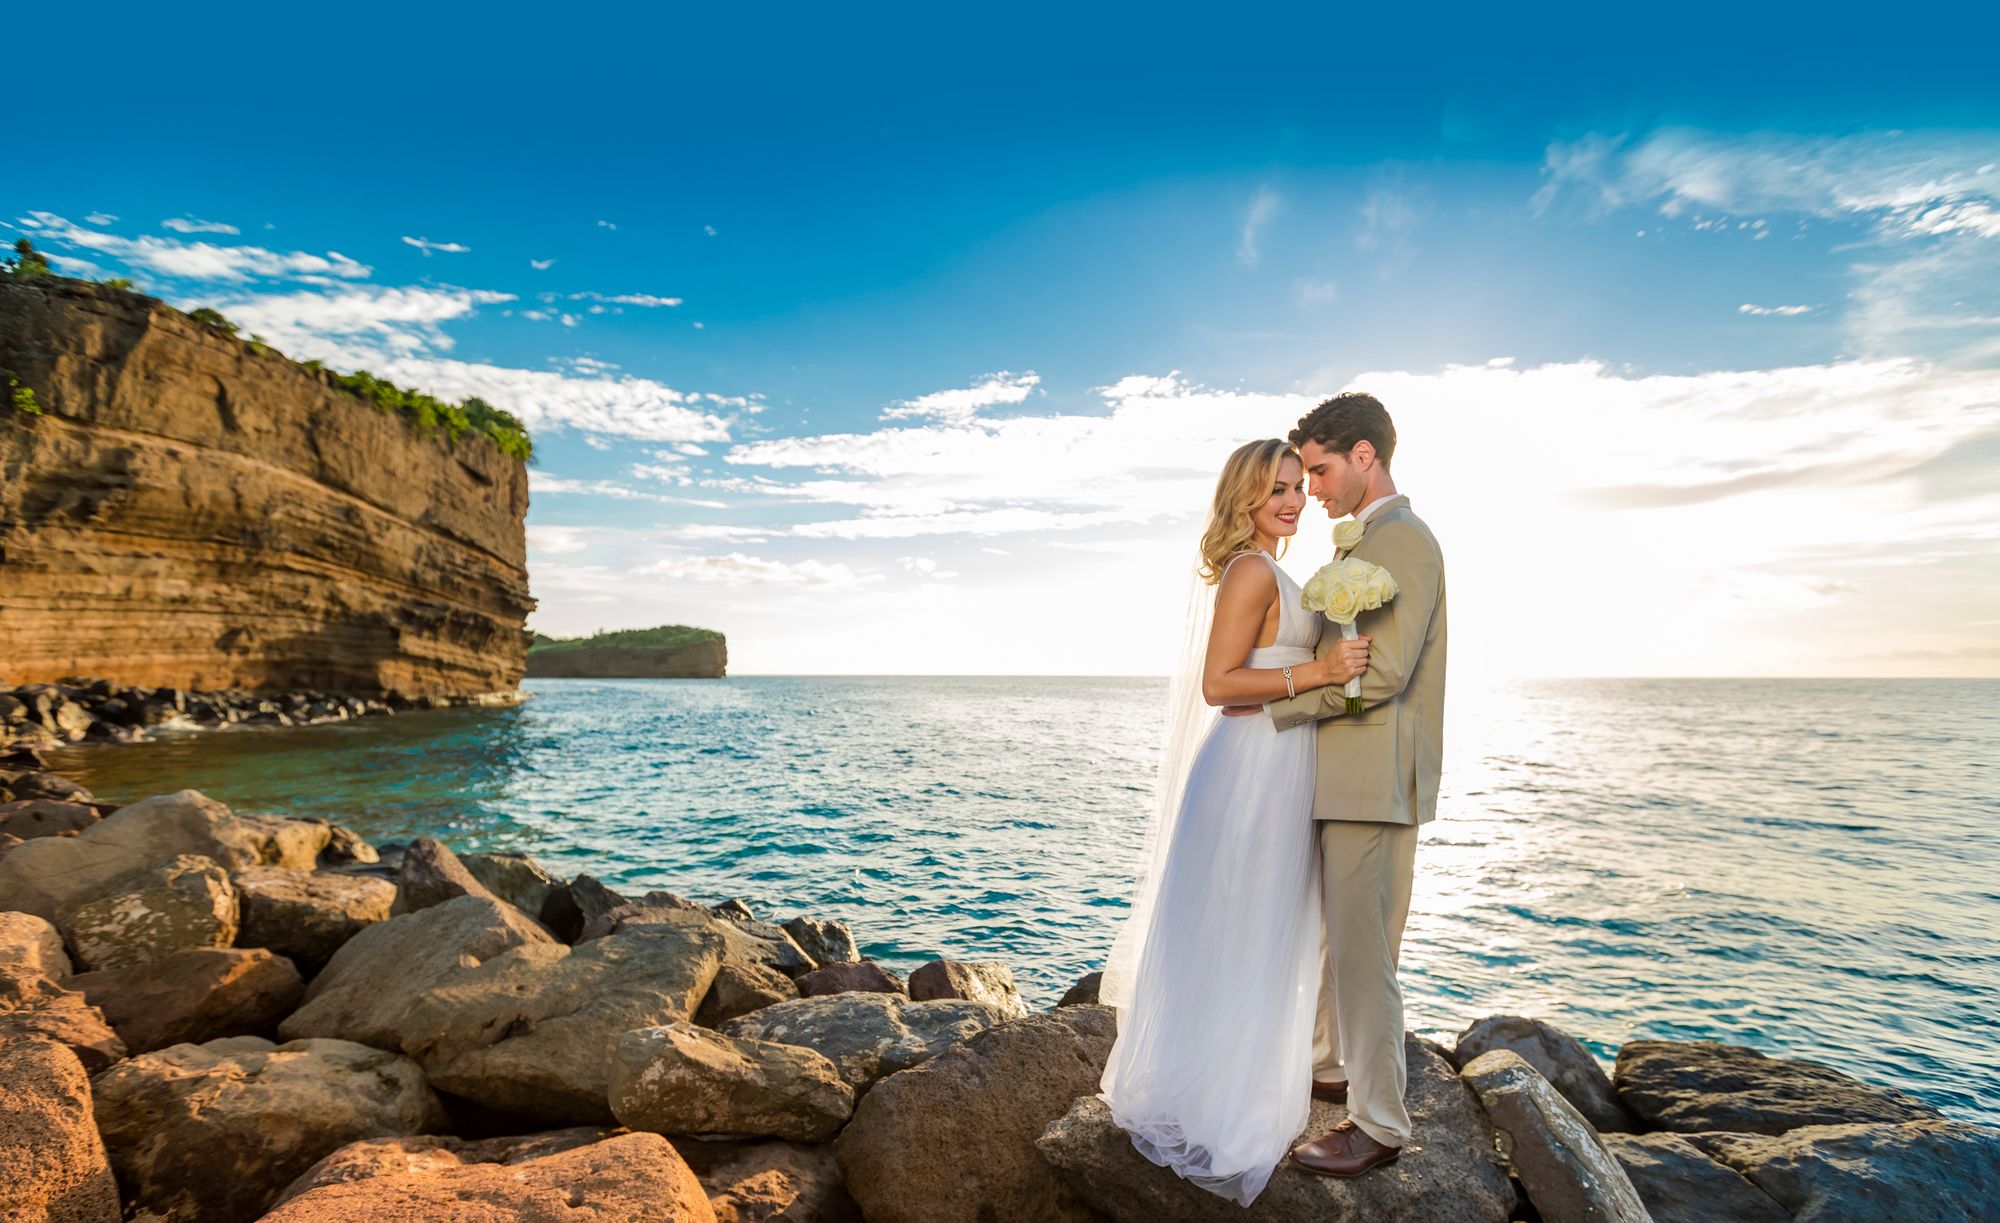 Your Destination Wedding Guide To The Perfect Caribbean Wedding